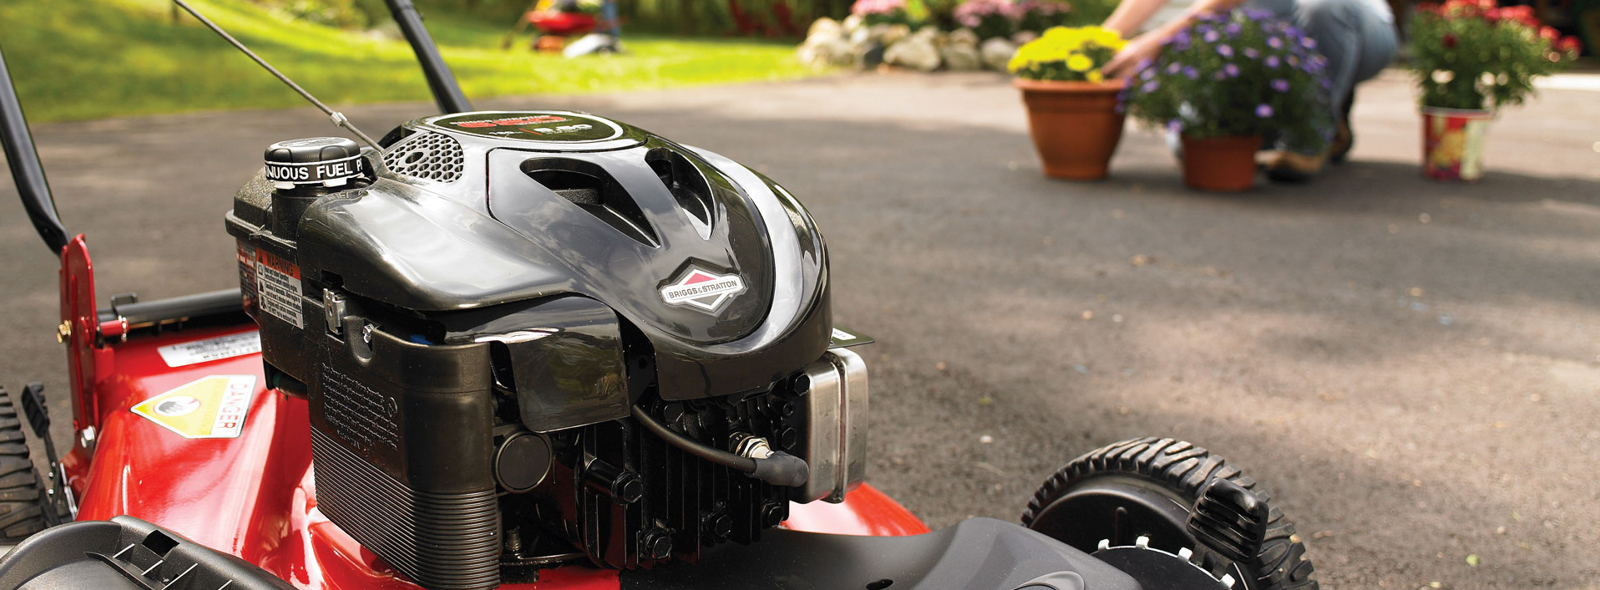 Briggs and Stratton Products